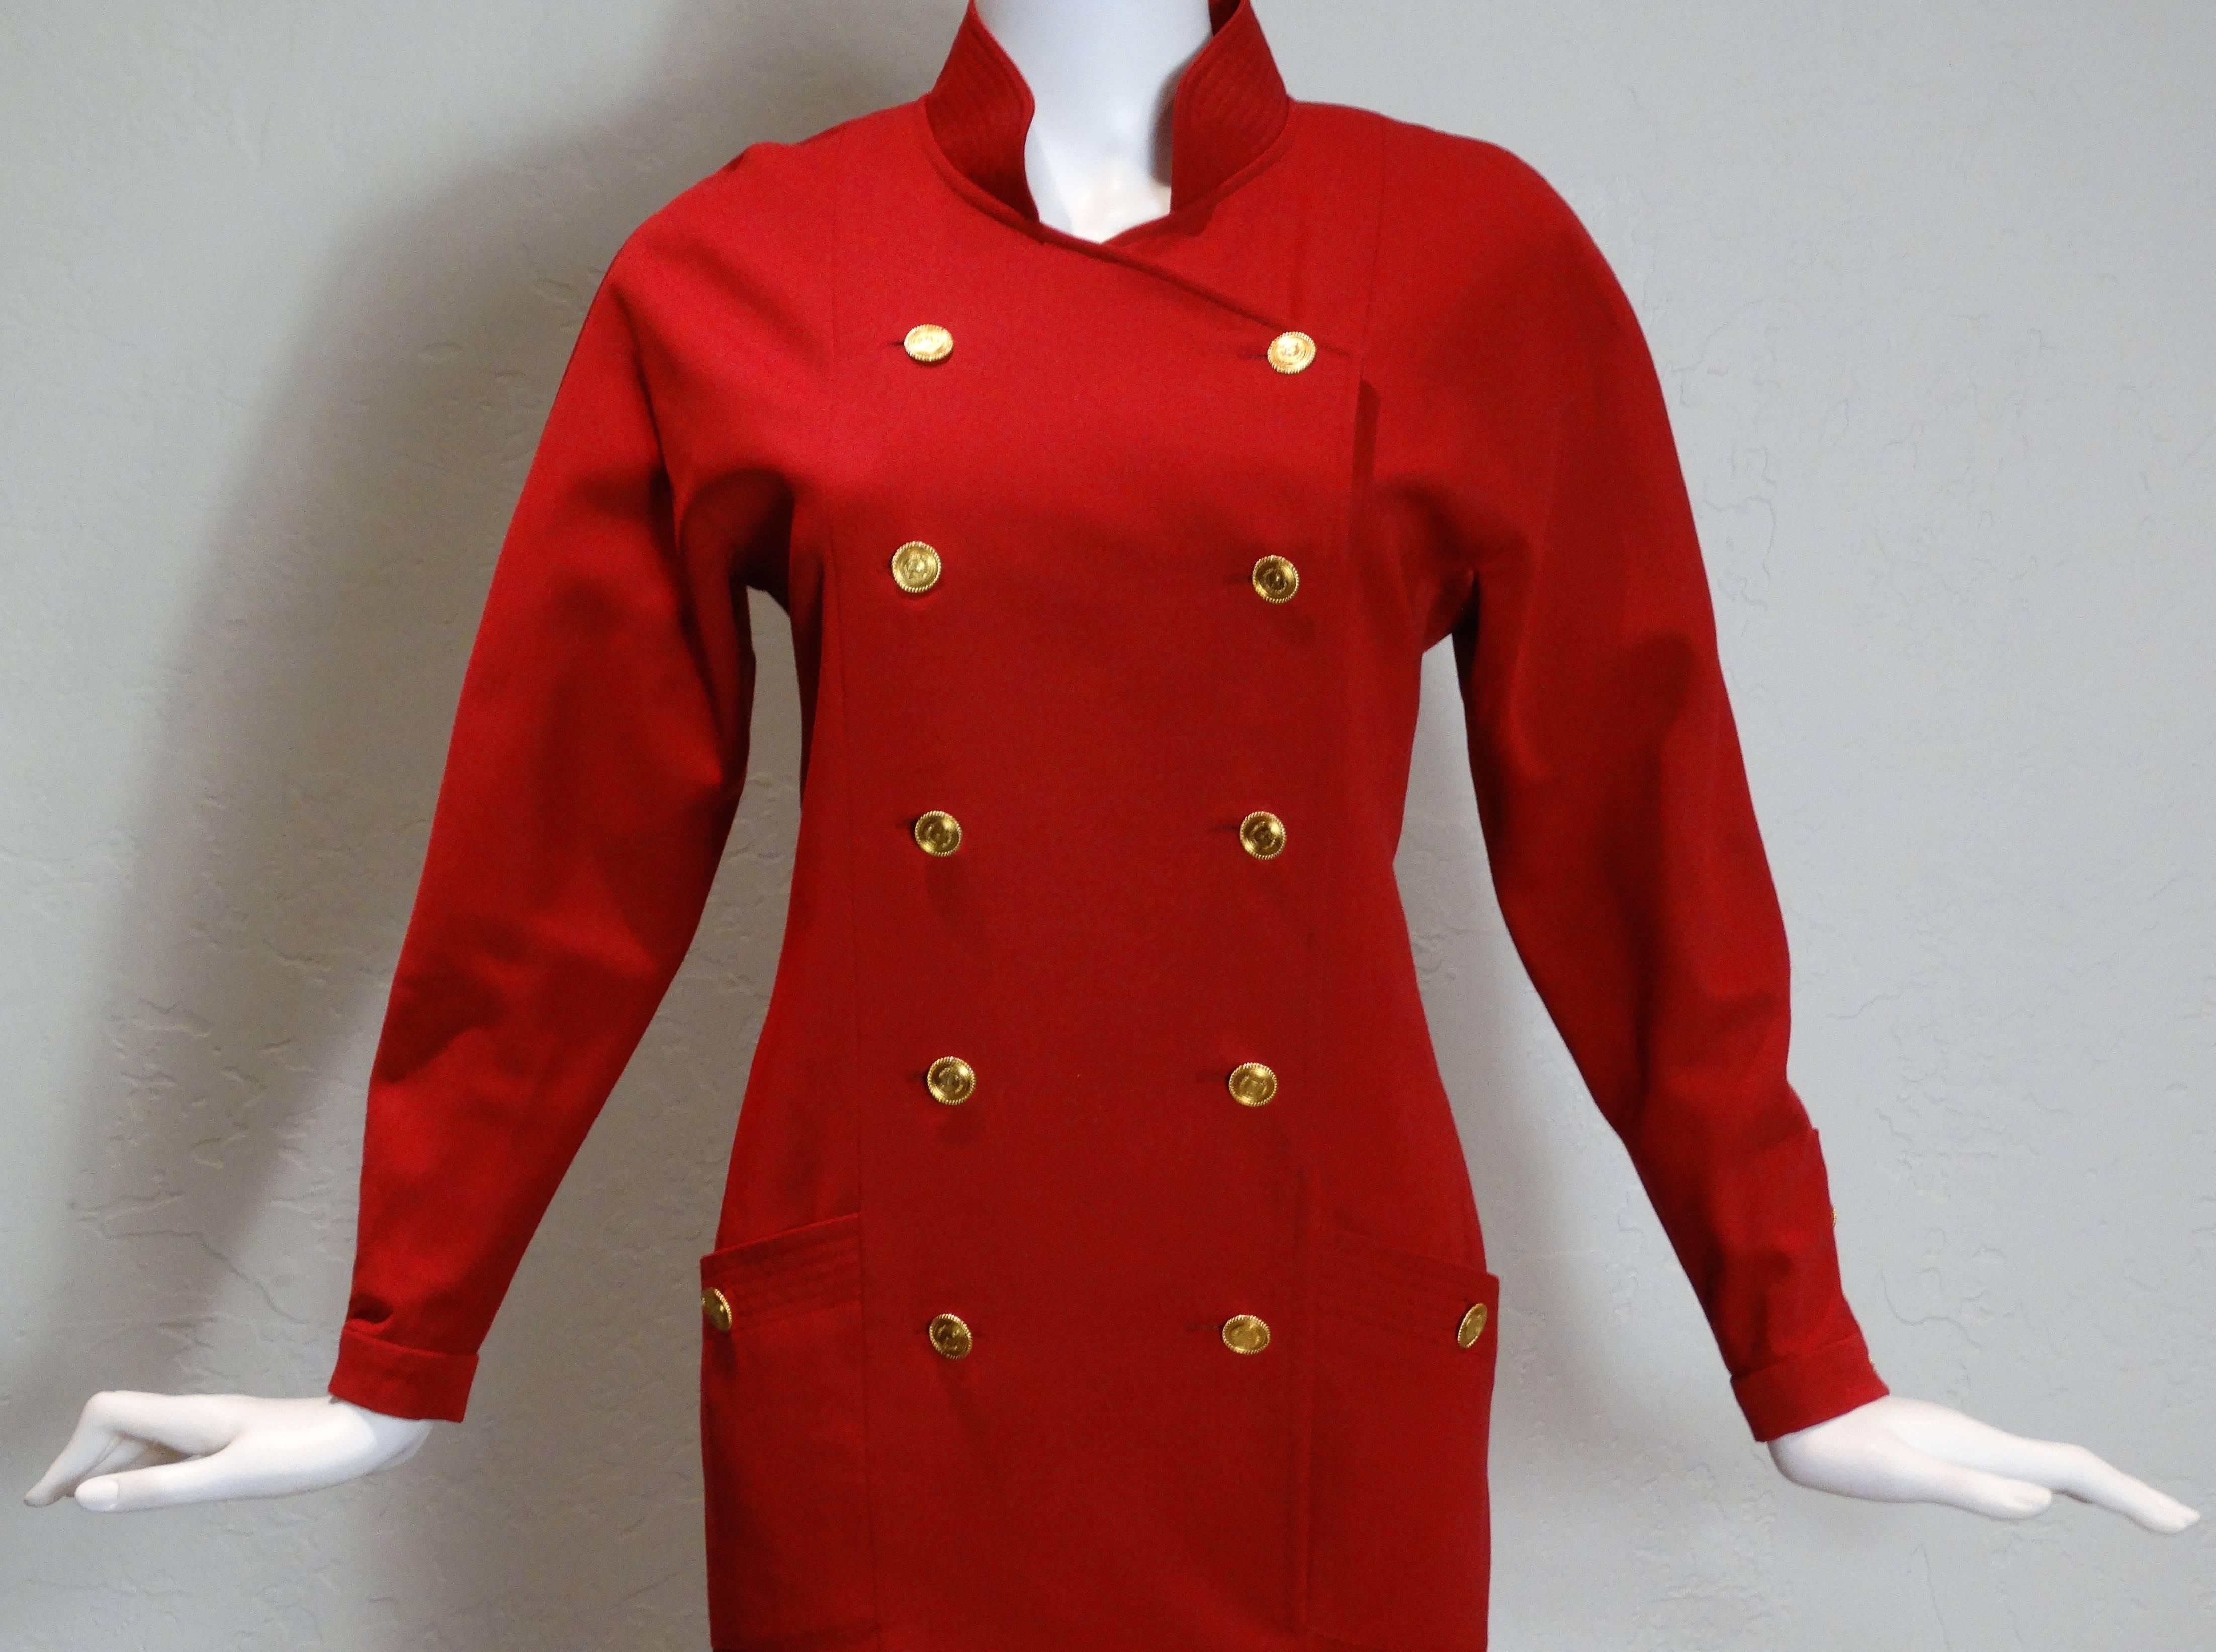 A true classic created by Chanel in the late 1980's. The little red dress has a button front with 10 Coco Chanel Buttons and 2 Coco buttons attached to the side pockets. This dress has a high collar and structured shoulders. Long-sleeves  with three